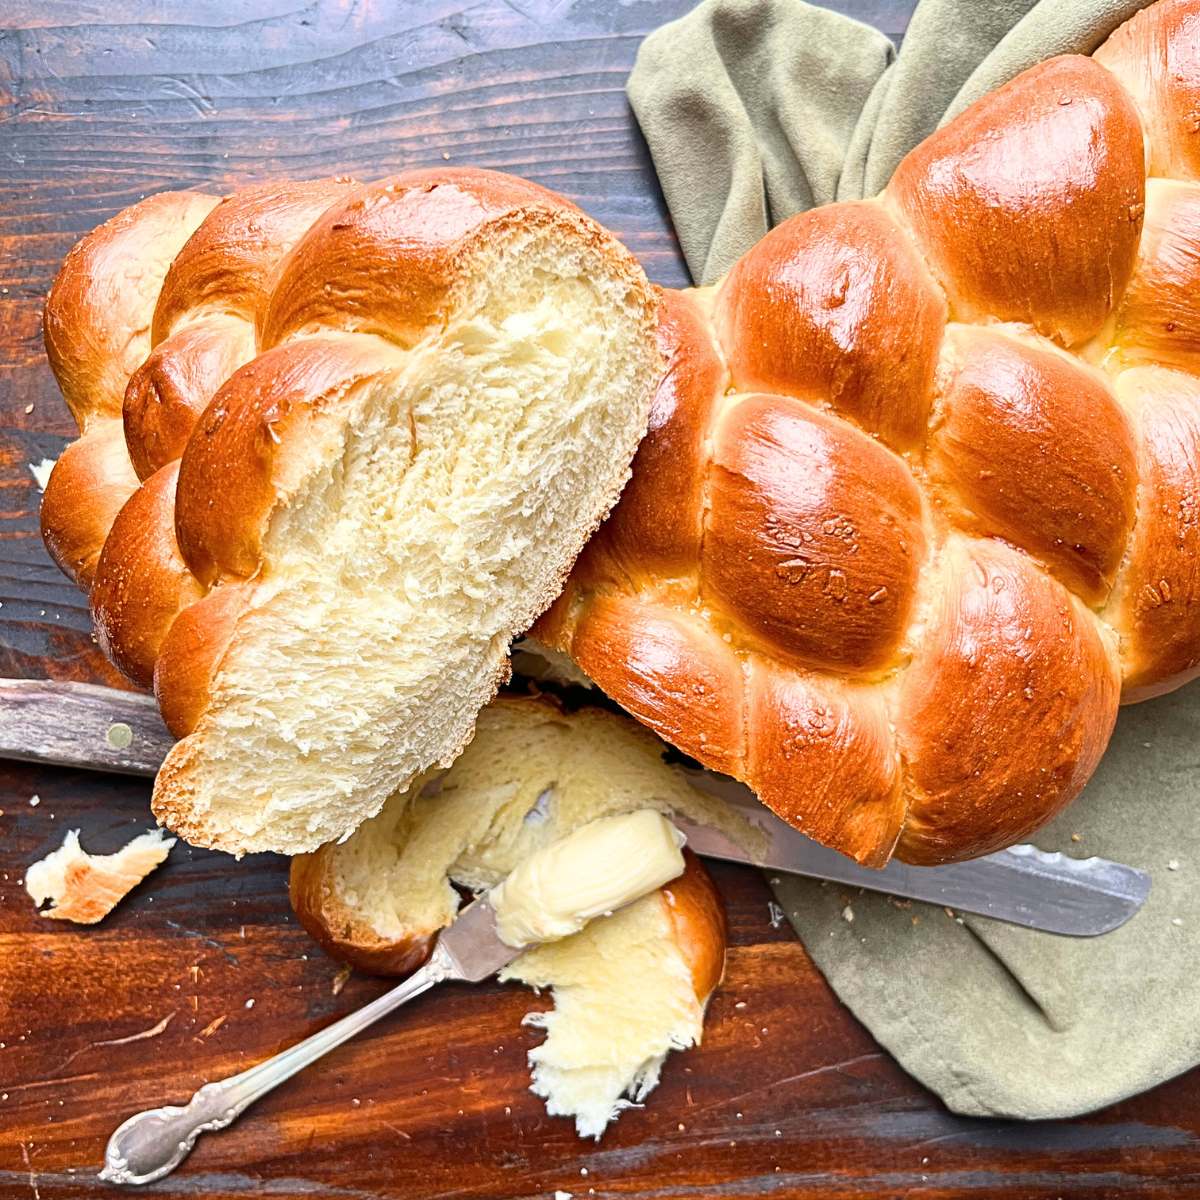 A braided bread loaf that has been but to show the inside. There is a knife with butter on it.